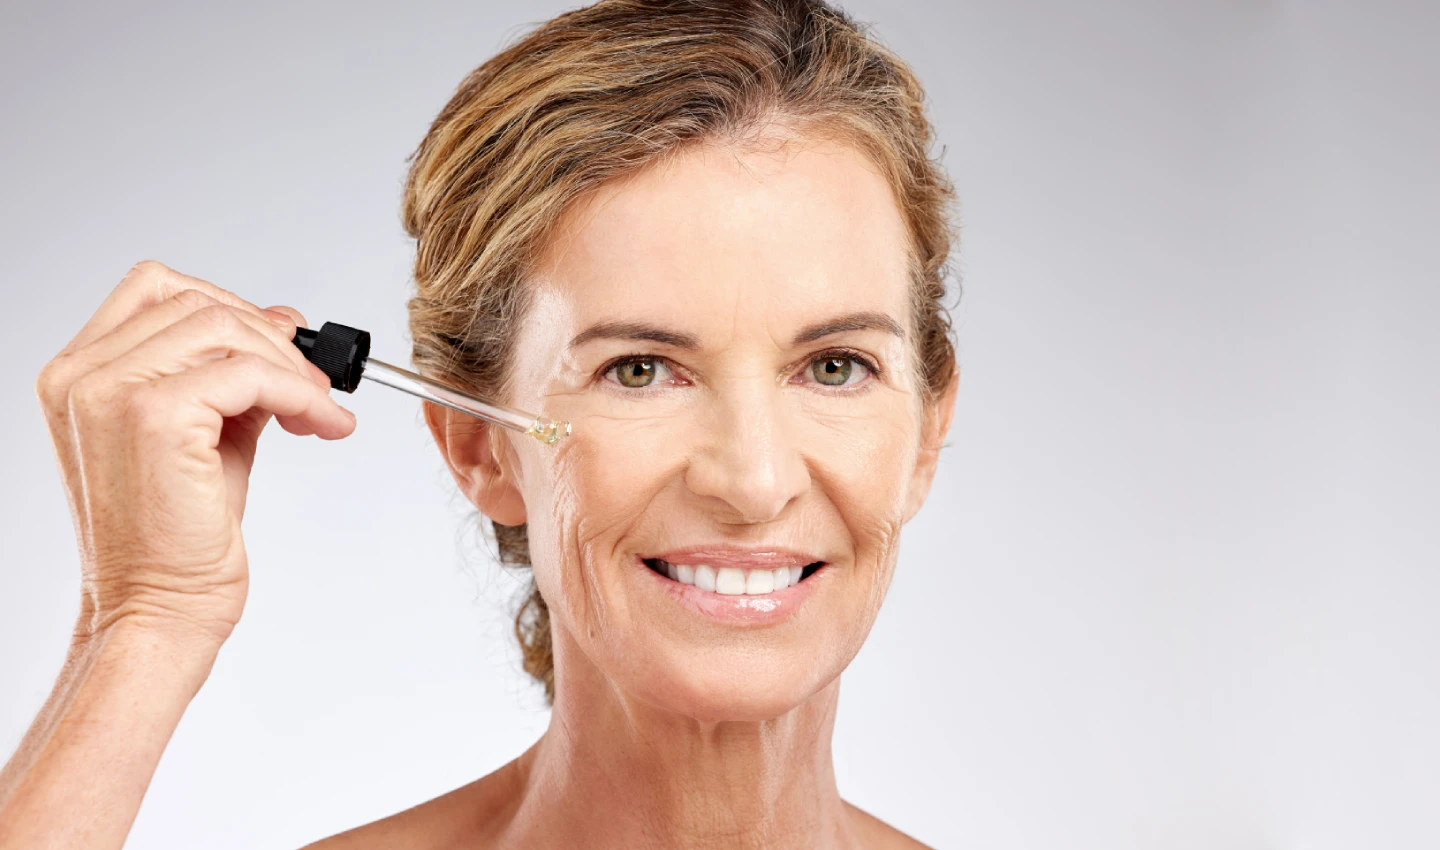 An older woman with visibly softened fine lines and wrinkles on her face after using Retinol Treatments.